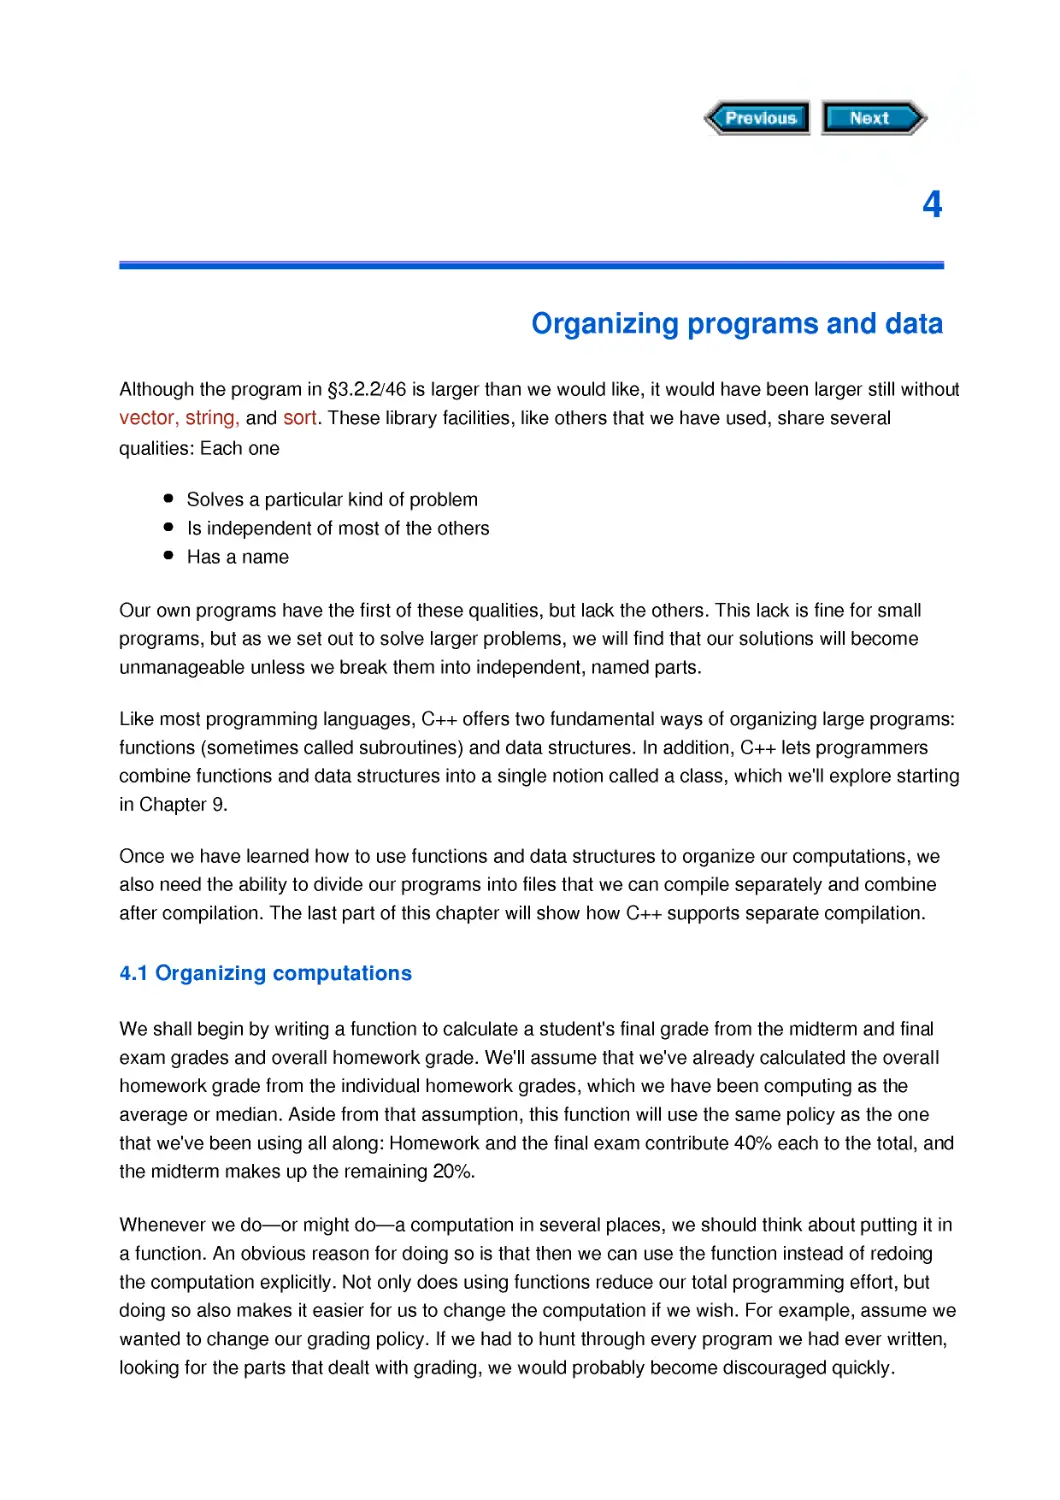 Chapter 4 Organizing programs and data